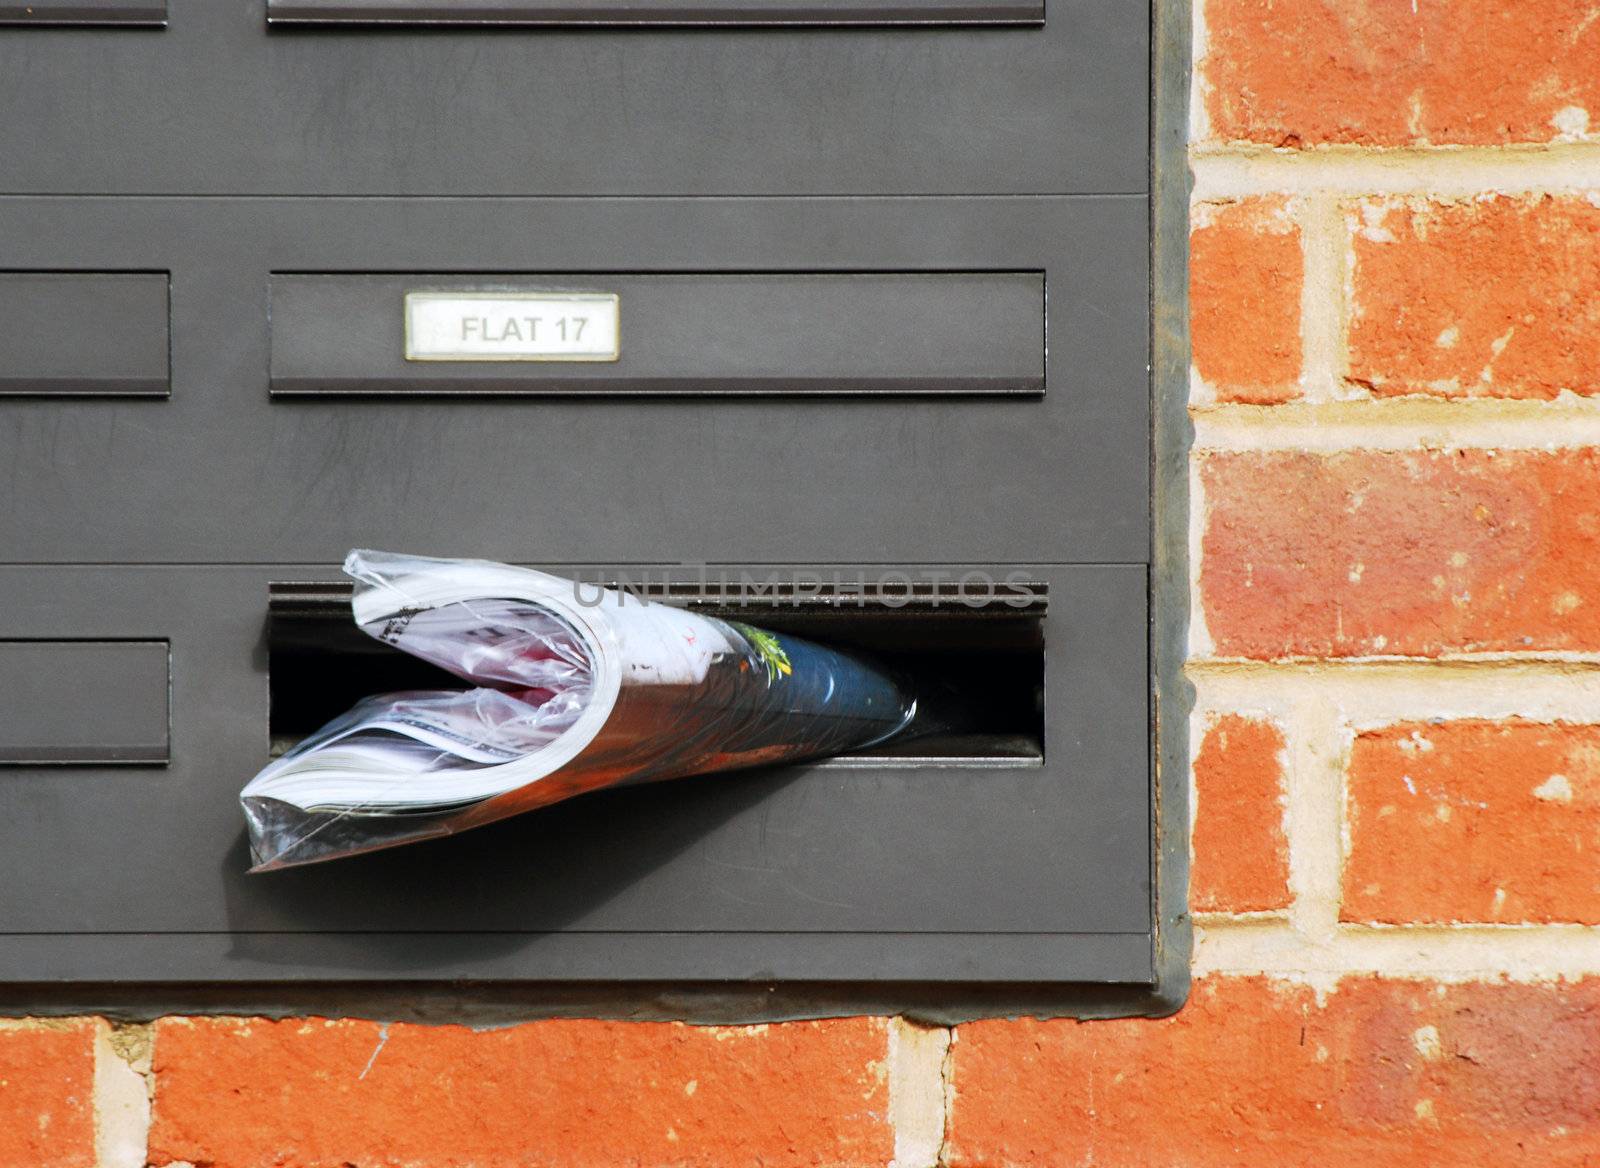 Catalogue or magazine sticks out from letterbox